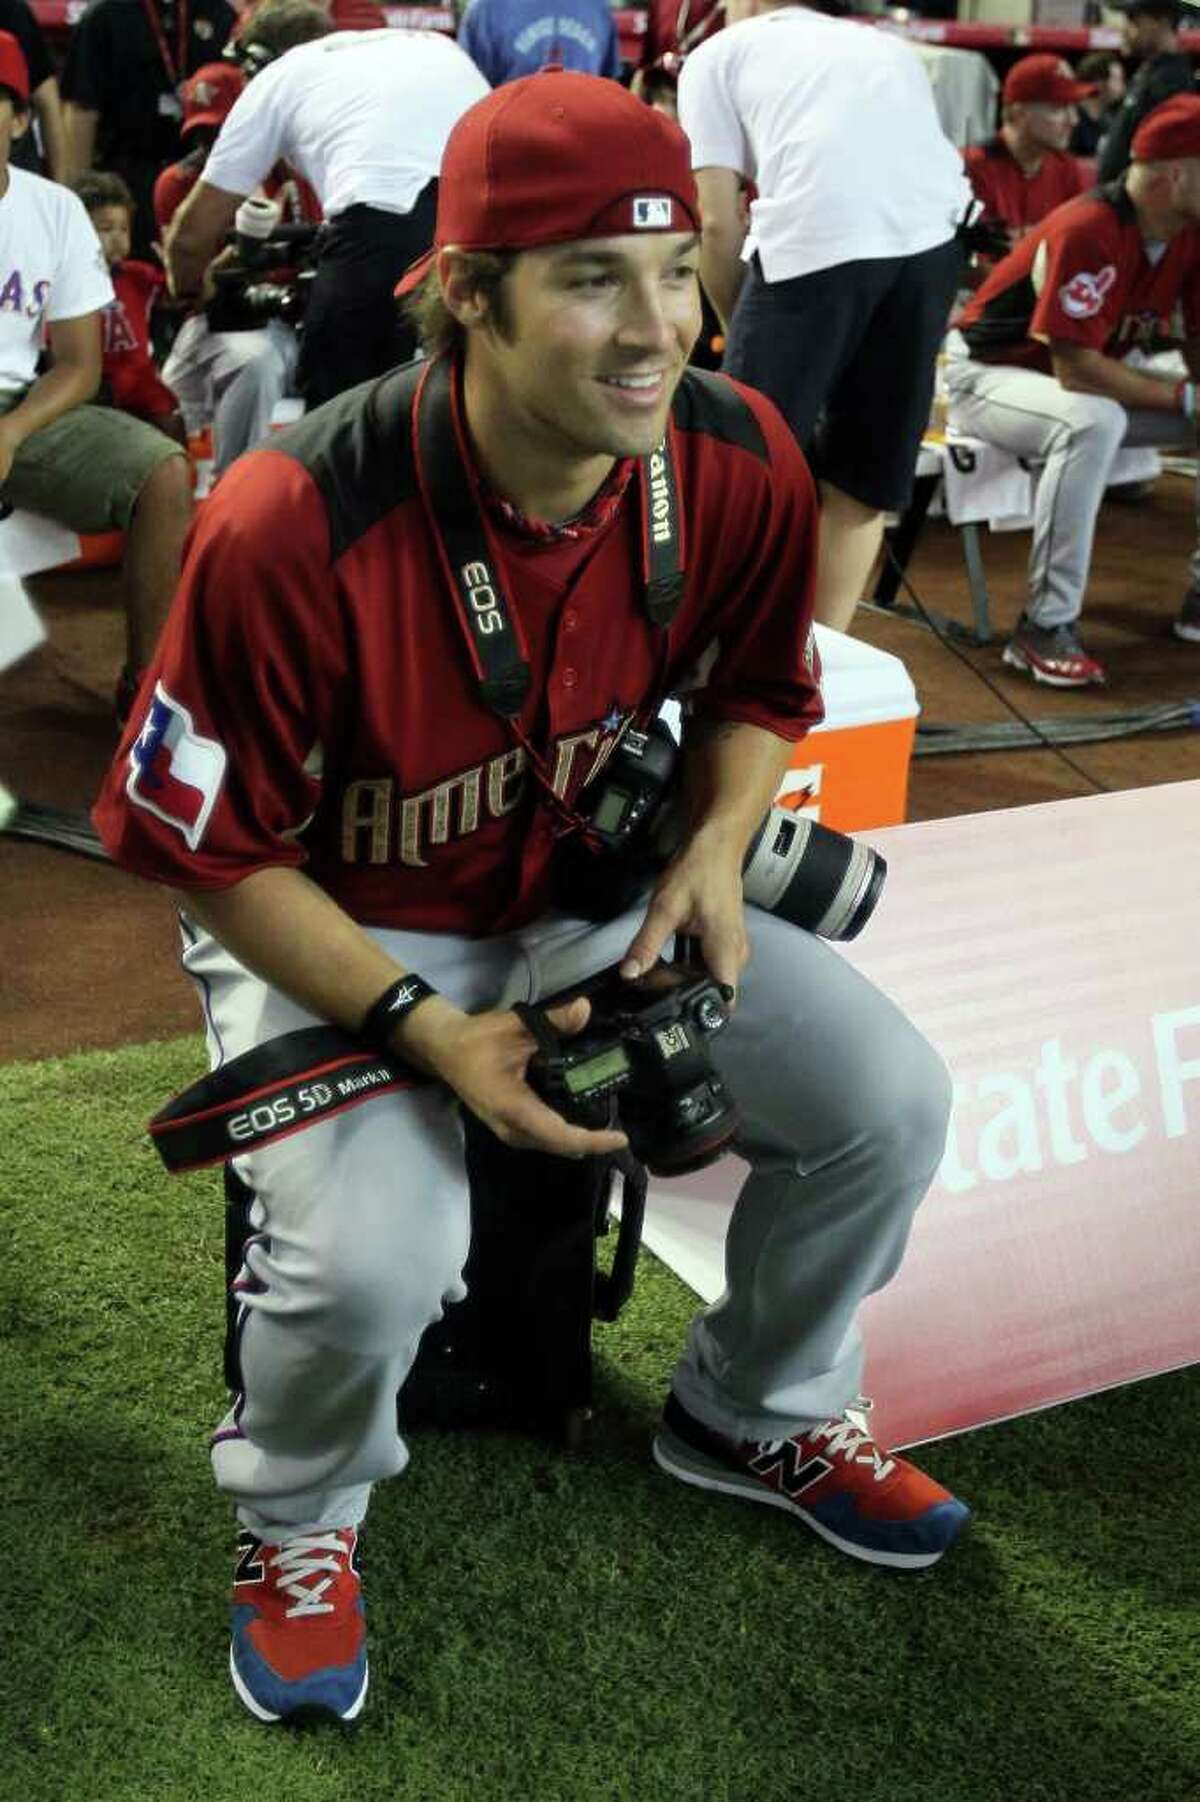 PHOENIX, AZ - JULY 11: American League All-Star C.J. Wilson #36 of the Texas Rangers looks on with his cameras during the 2011 State Farm Home Run Derby at Chase Field on July 11, 2011 in Phoenix, Arizona. (Photo by Jeff Gross/Getty Images)